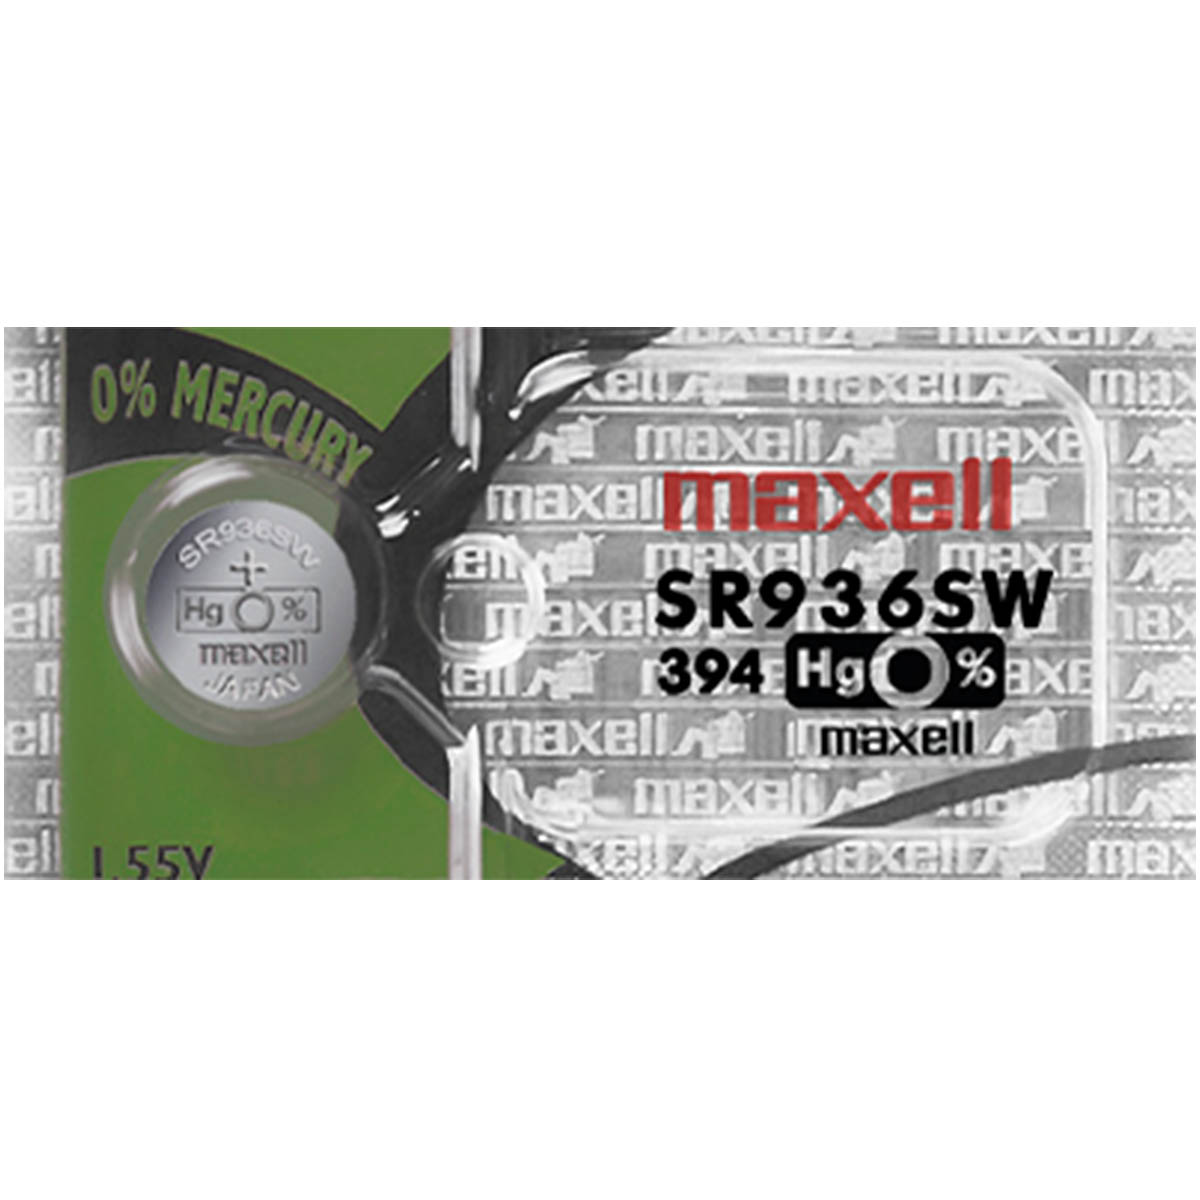 LR41-BP10 - Maxell LR41 Alkaline Button Cell Battery replaces 192